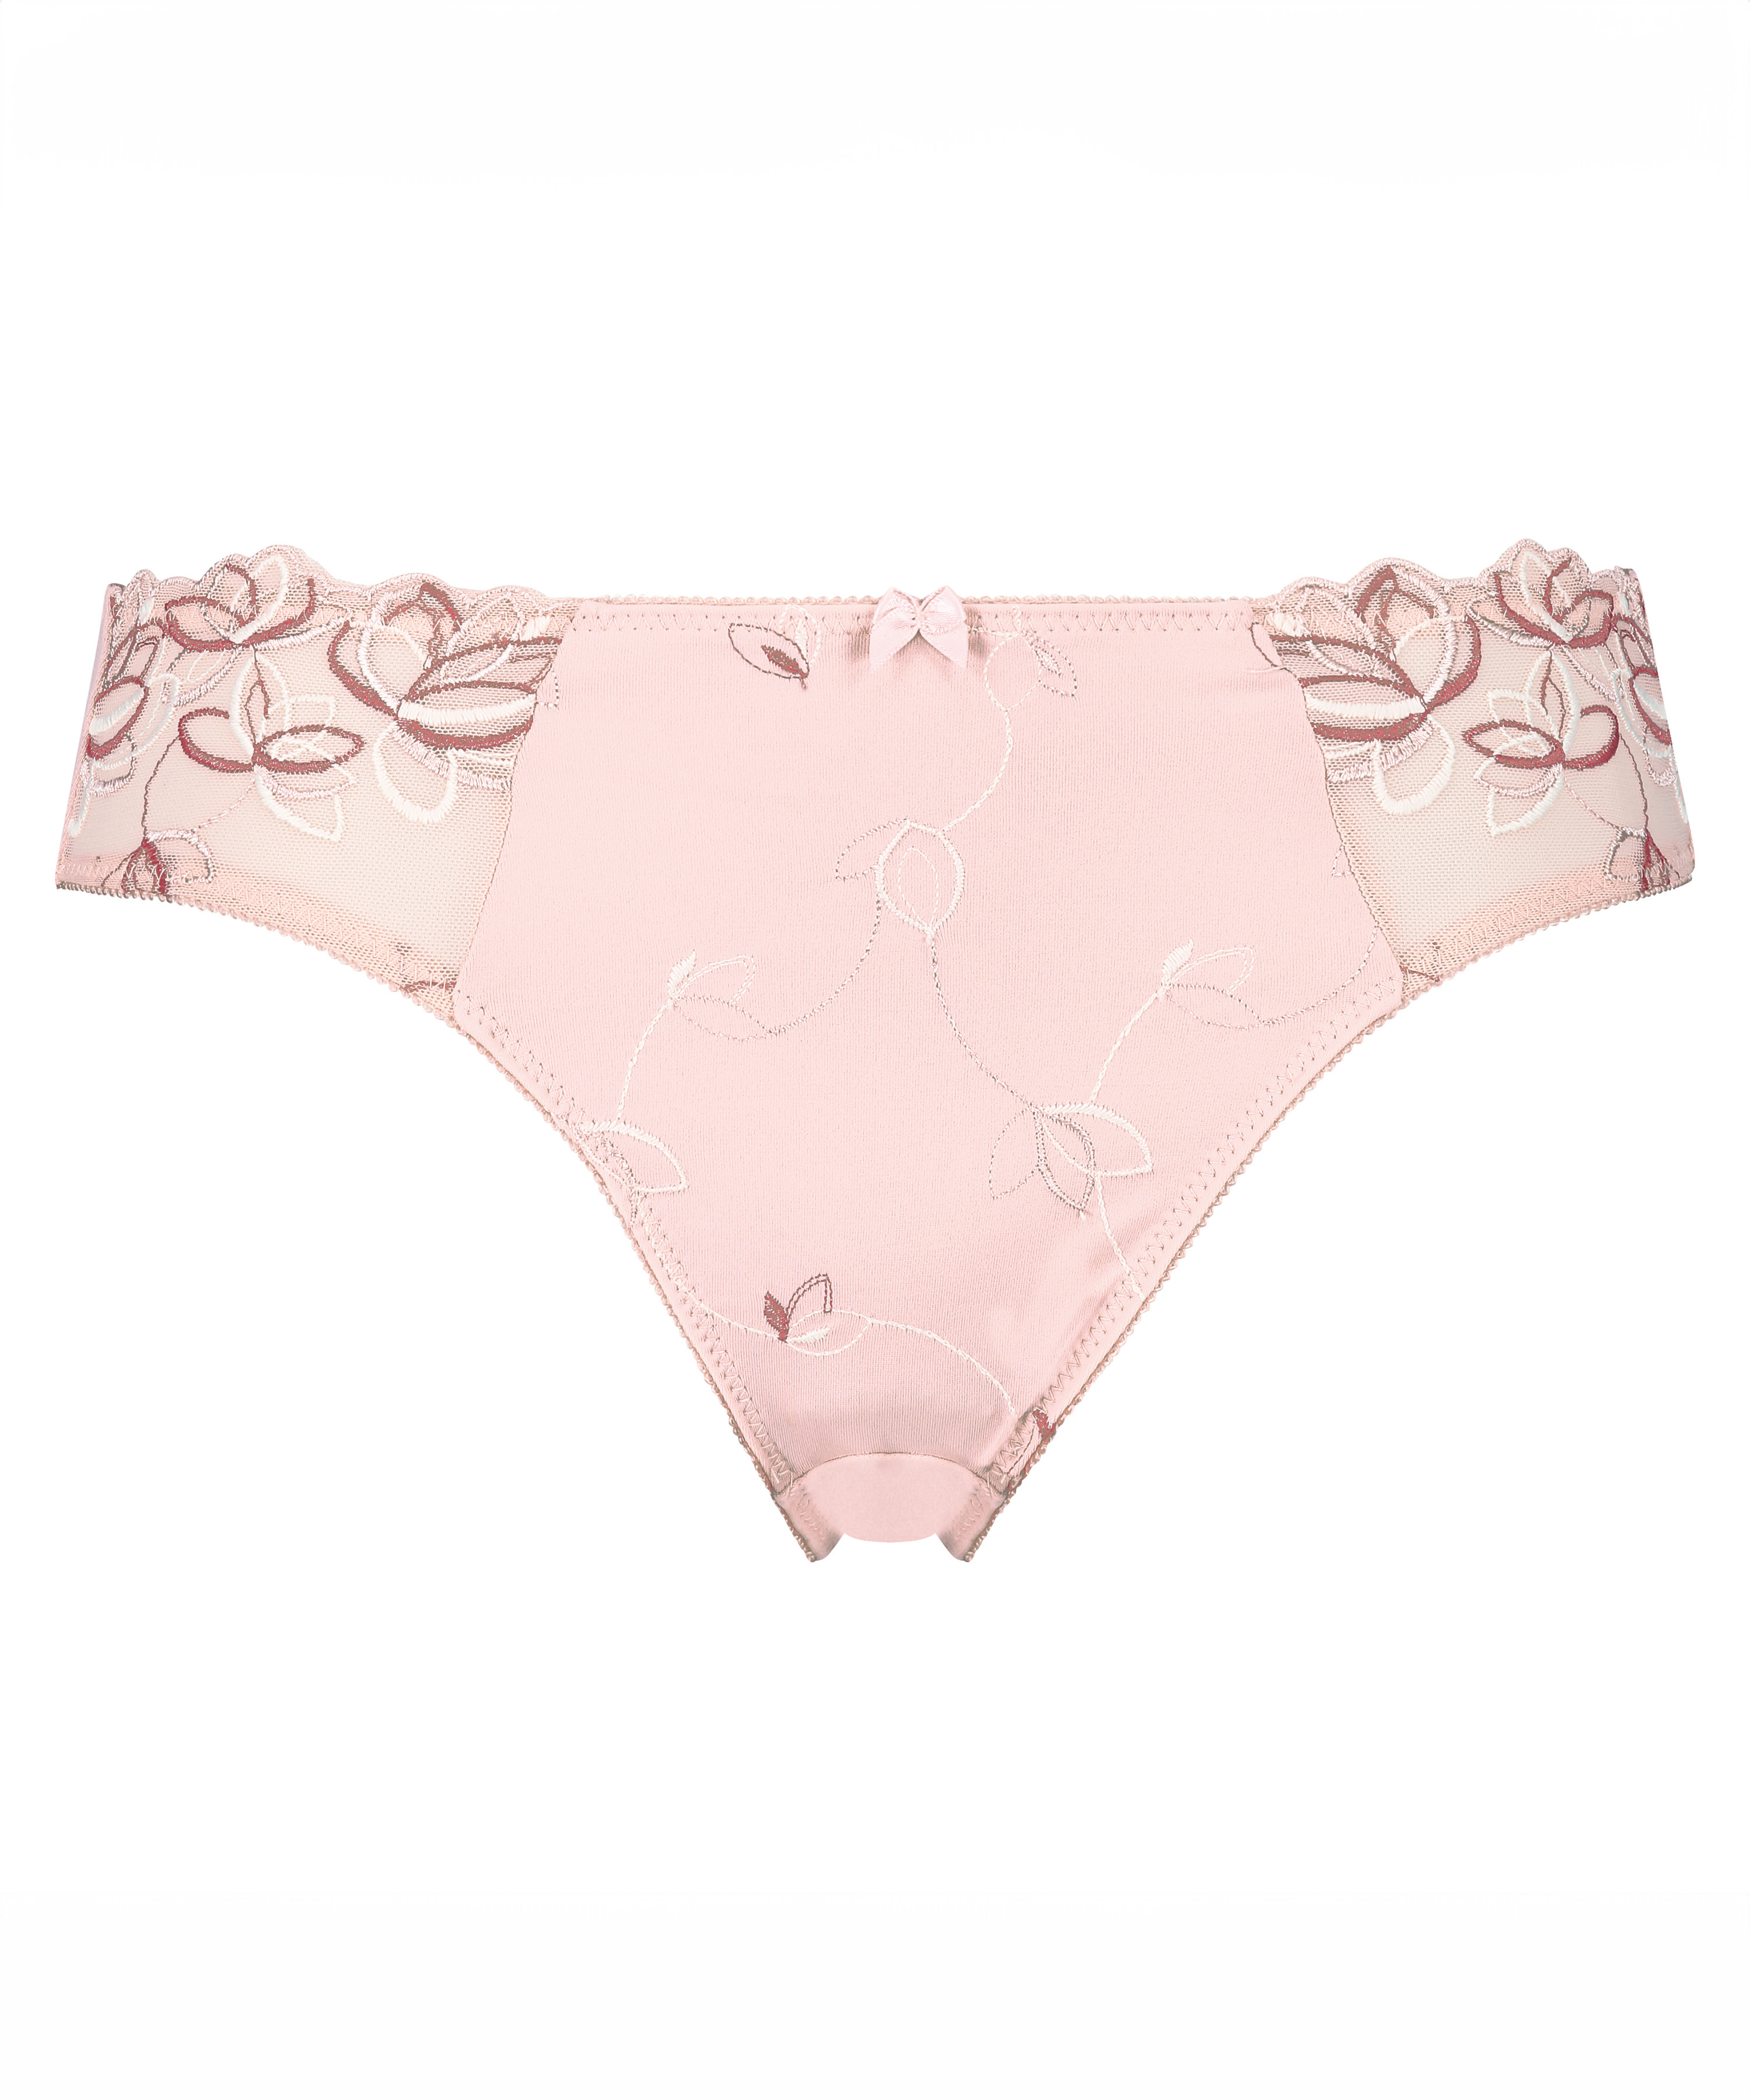 Diva knickers, Pink, main